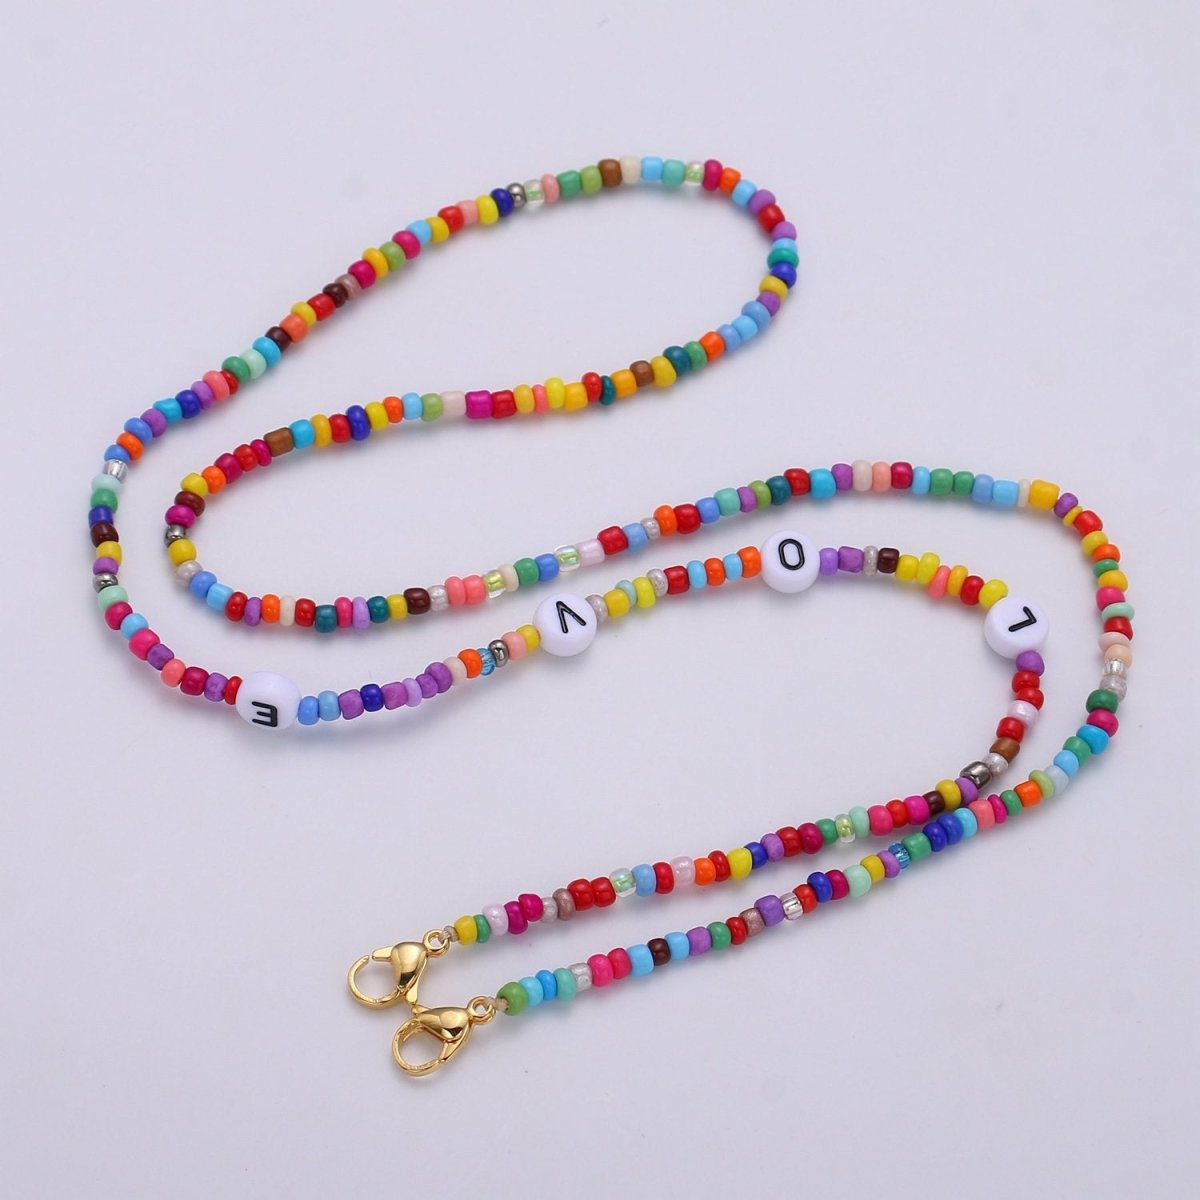 LOVE Face Mask Lanyard, Beaded Mask Necklace, Kids Adult Face Mask Chain, Fun Rainbow Colorful Mask Chain, Gold Mask Holder Chain with Clasp - DLUXCA